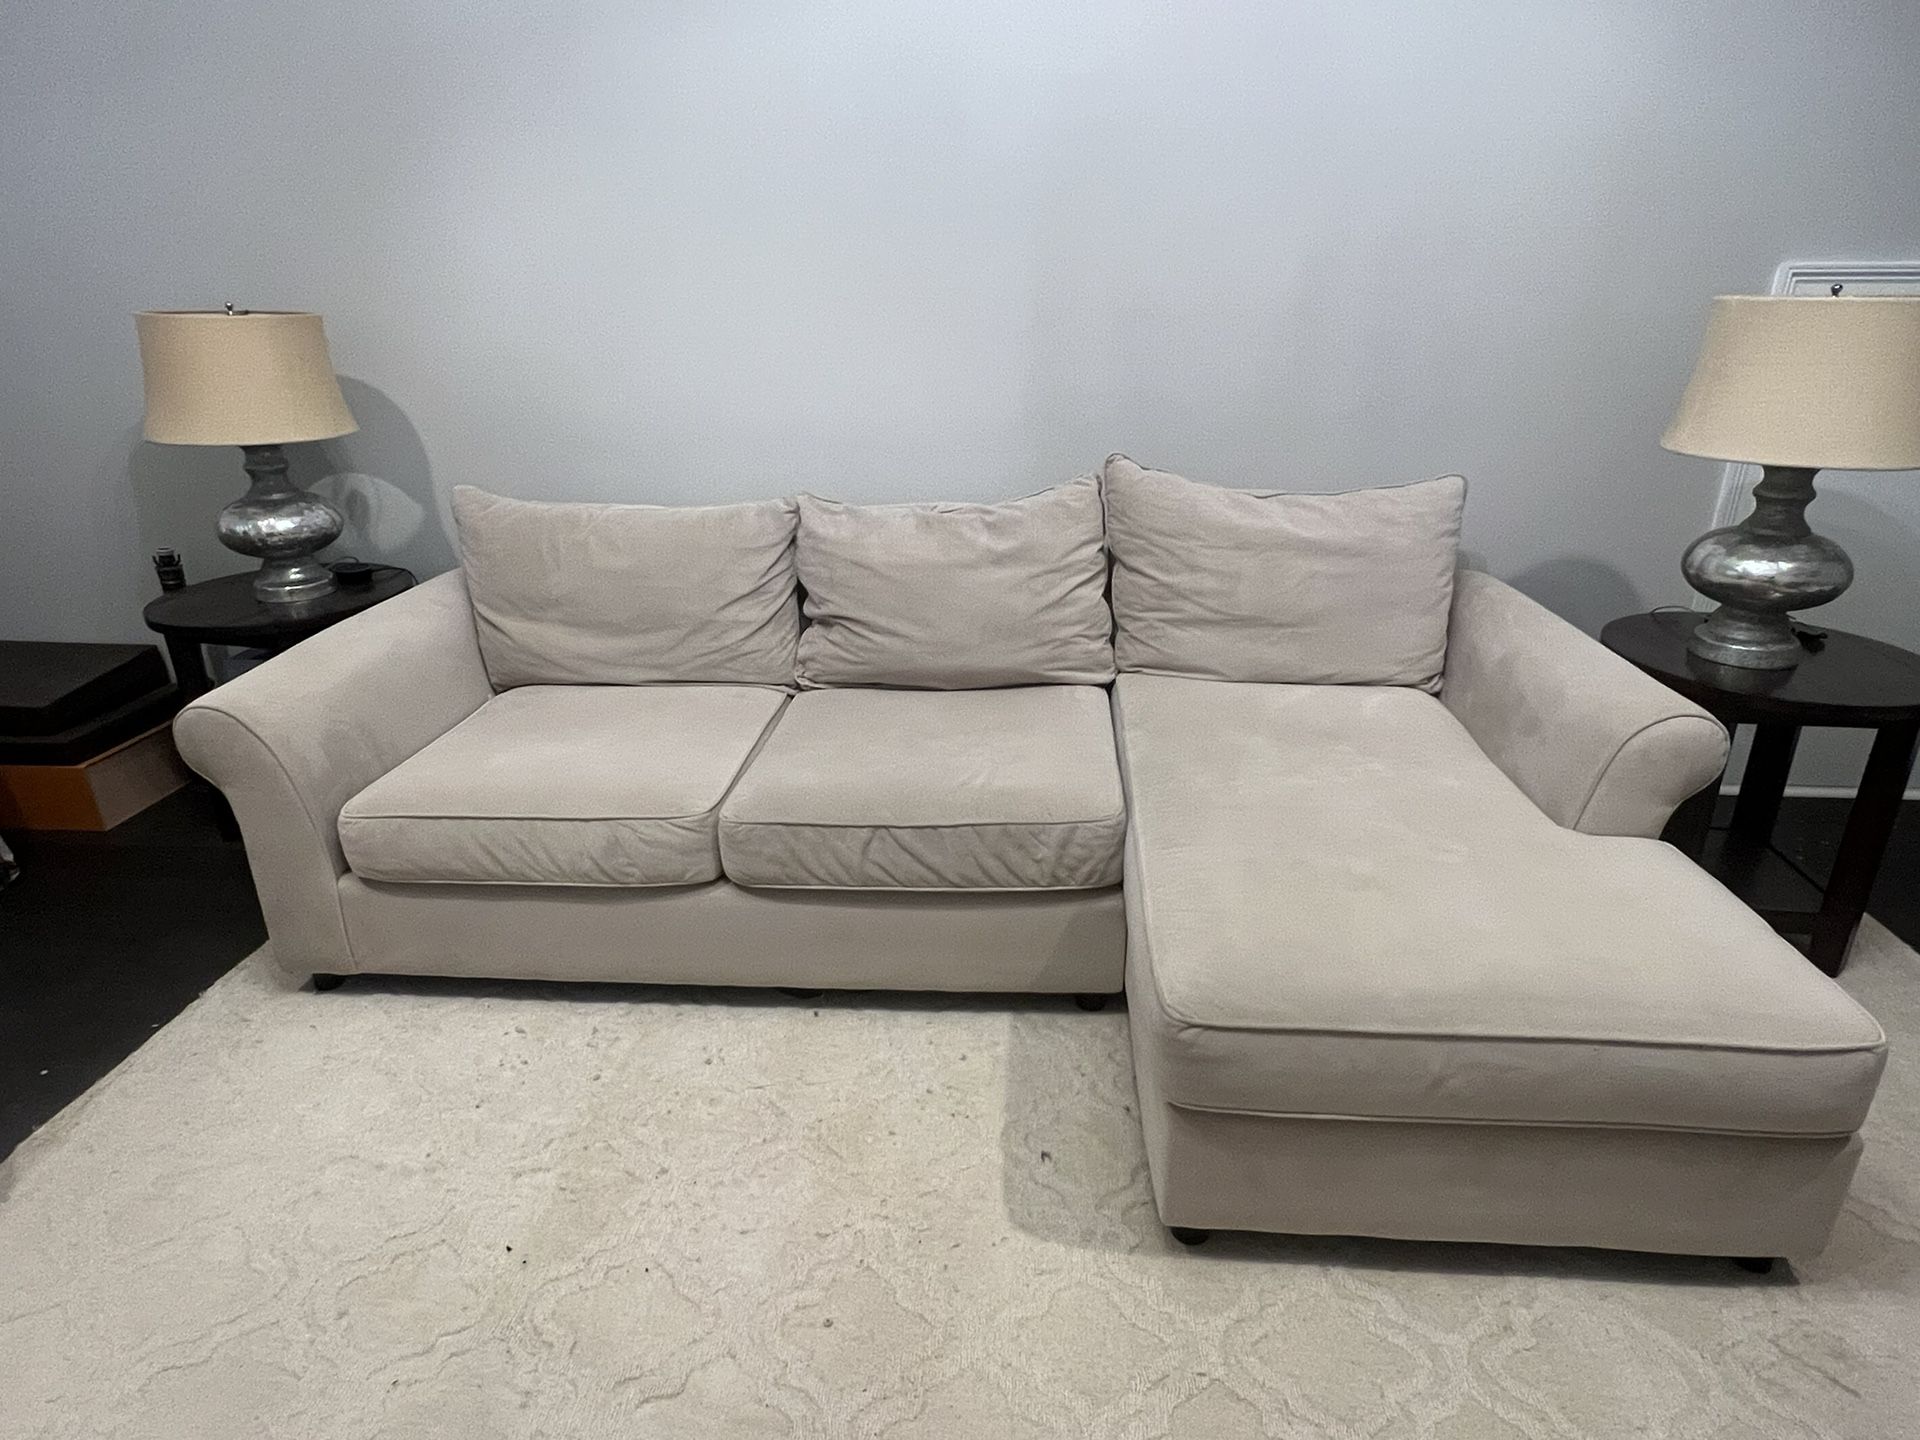 Pottery Barn Sectional Couch & Oversized Chair w/ Ottoman